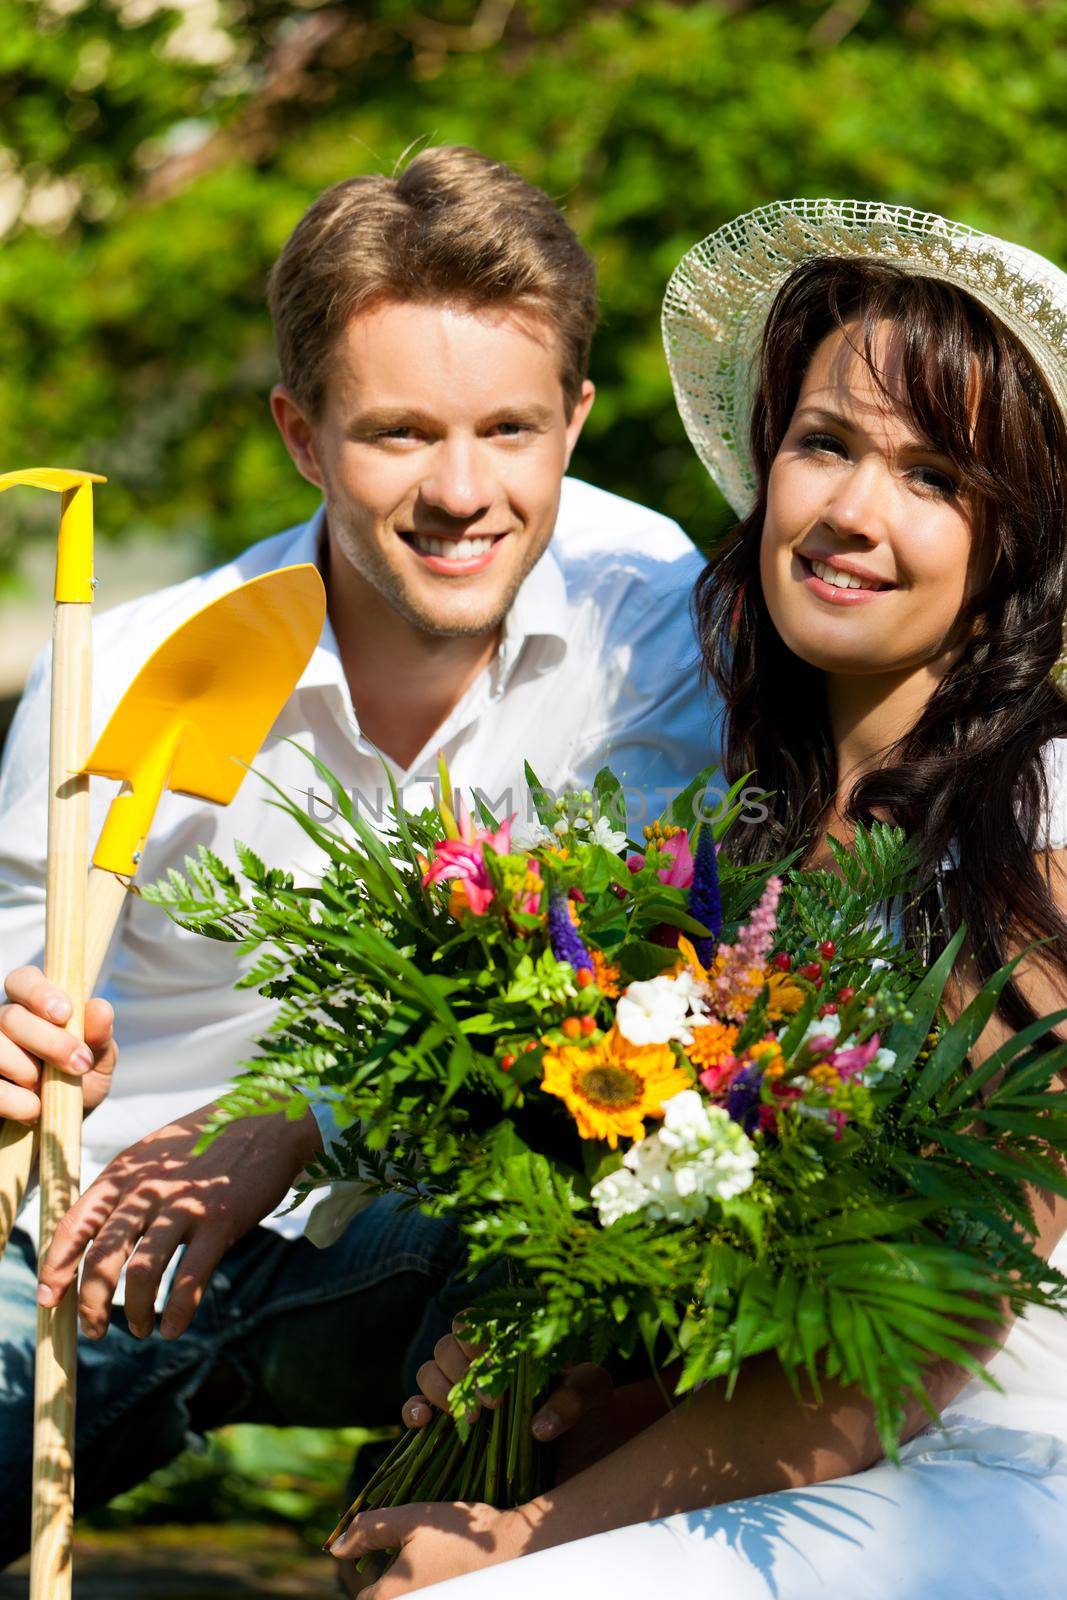 Happy couple gardening in summer with tools, she is wearing a hat